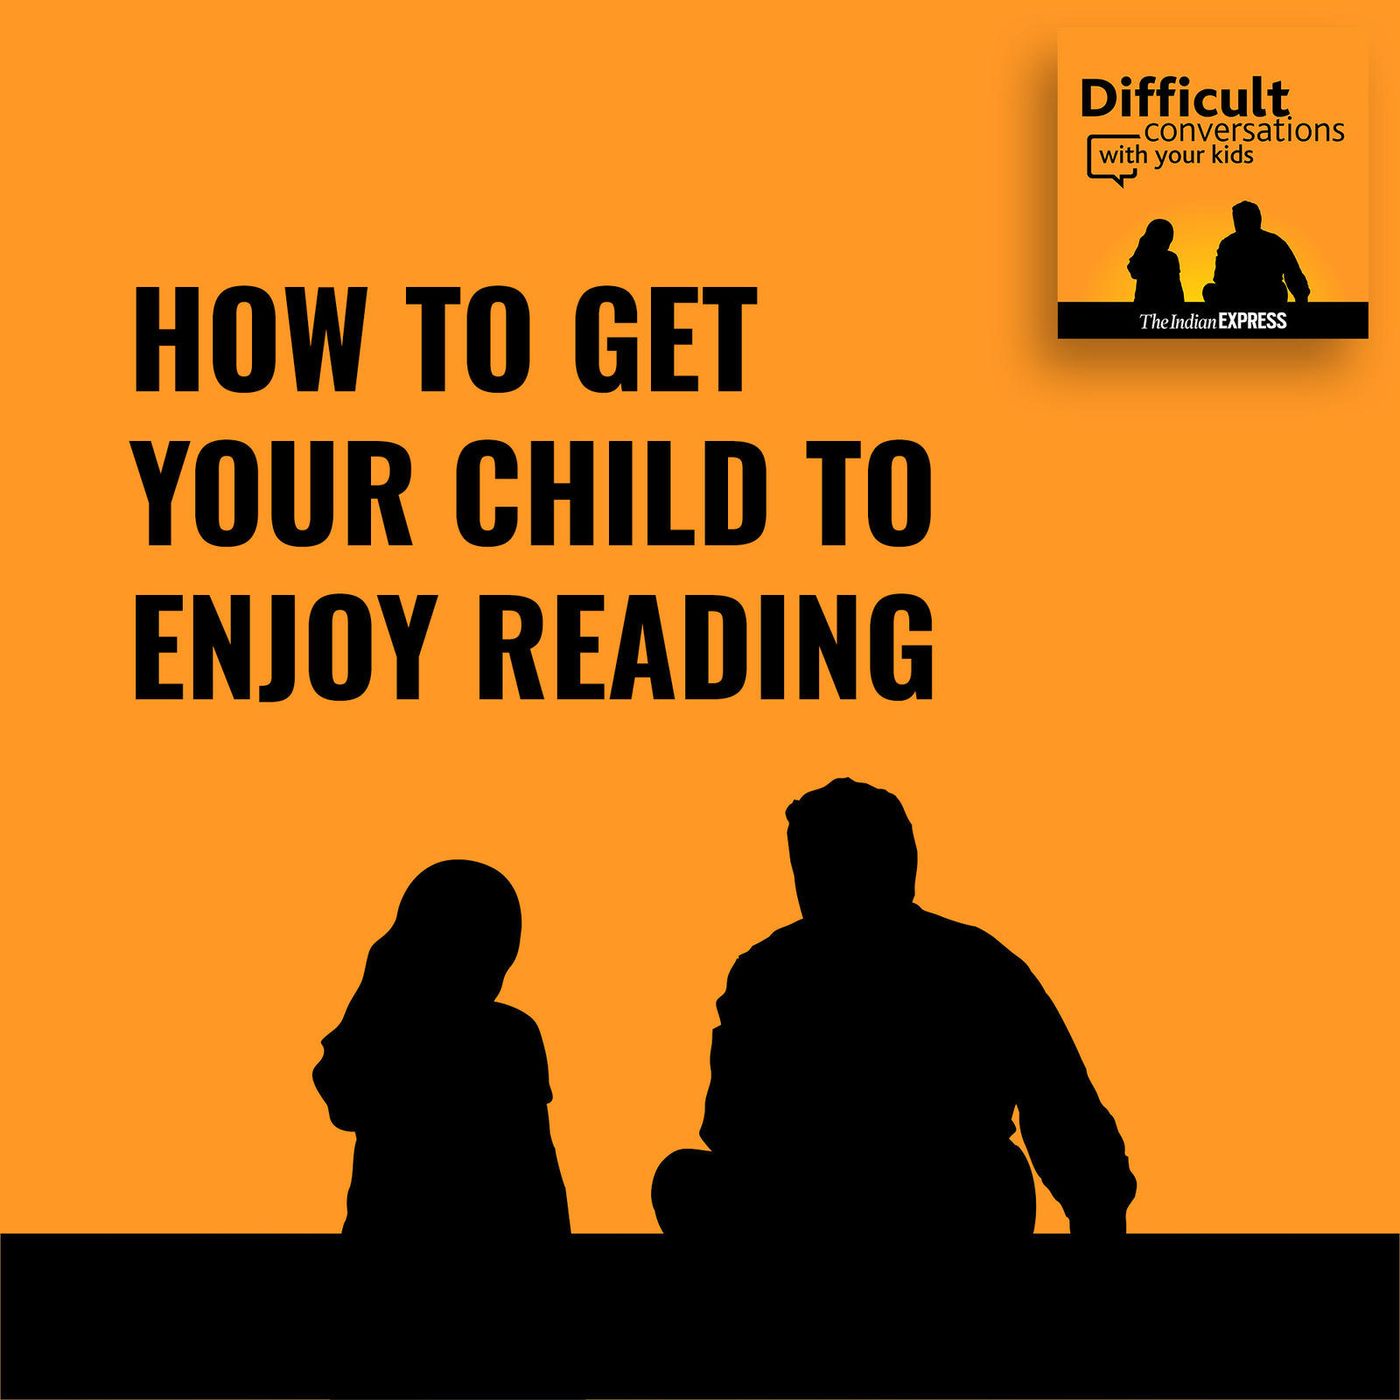 17: How to get your child to enjoy reading